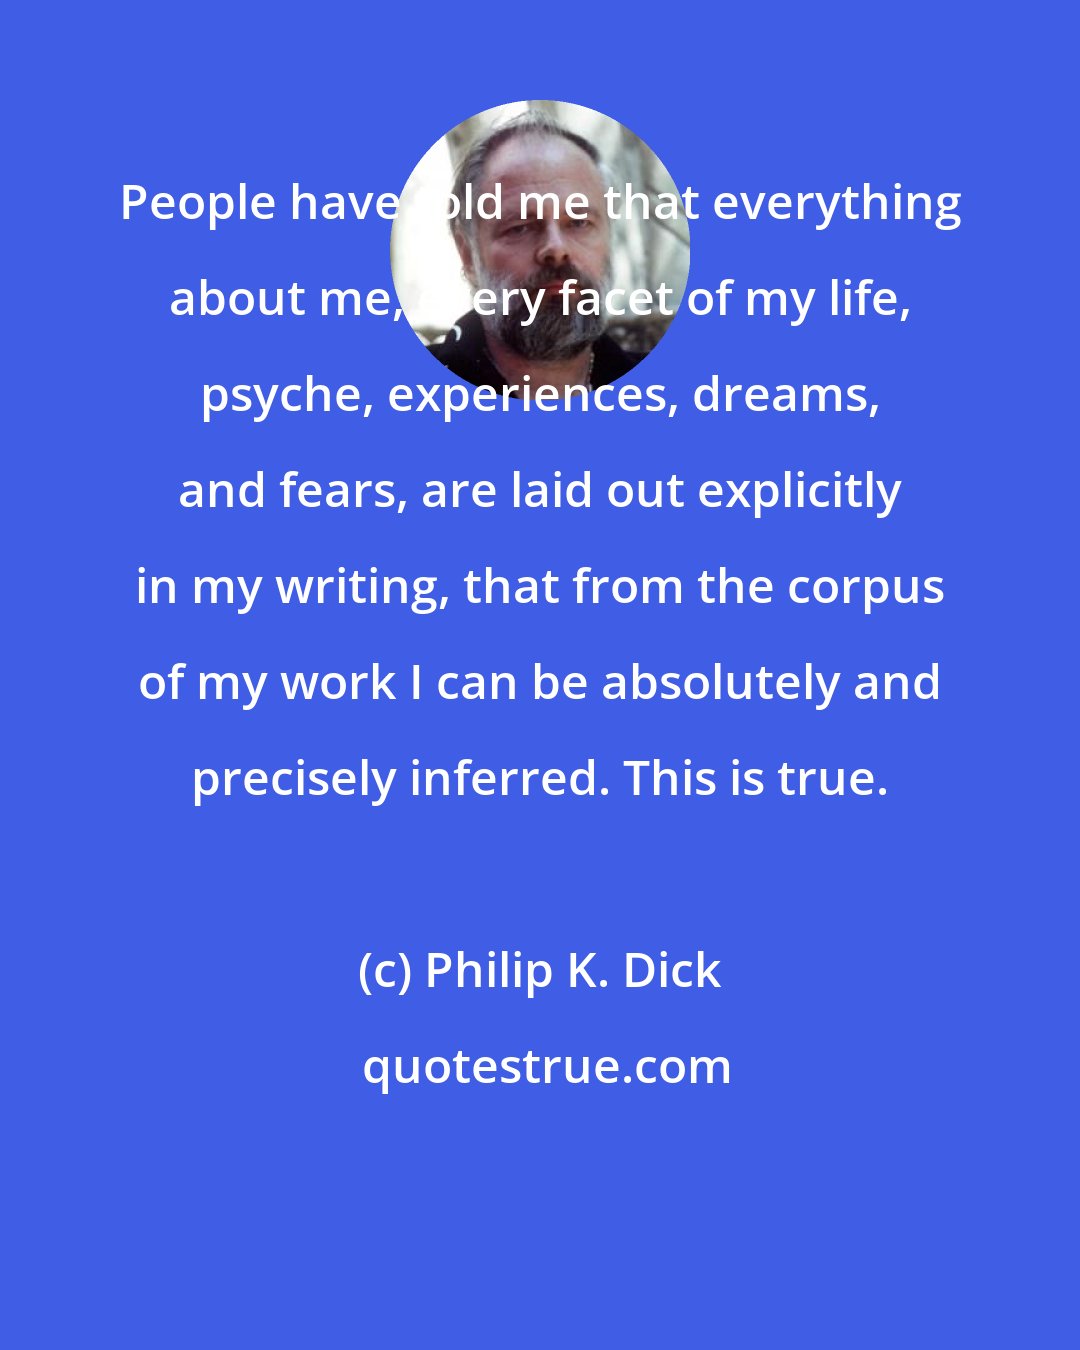 Philip K. Dick: People have told me that everything about me, every facet of my life, psyche, experiences, dreams, and fears, are laid out explicitly in my writing, that from the corpus of my work I can be absolutely and precisely inferred. This is true.